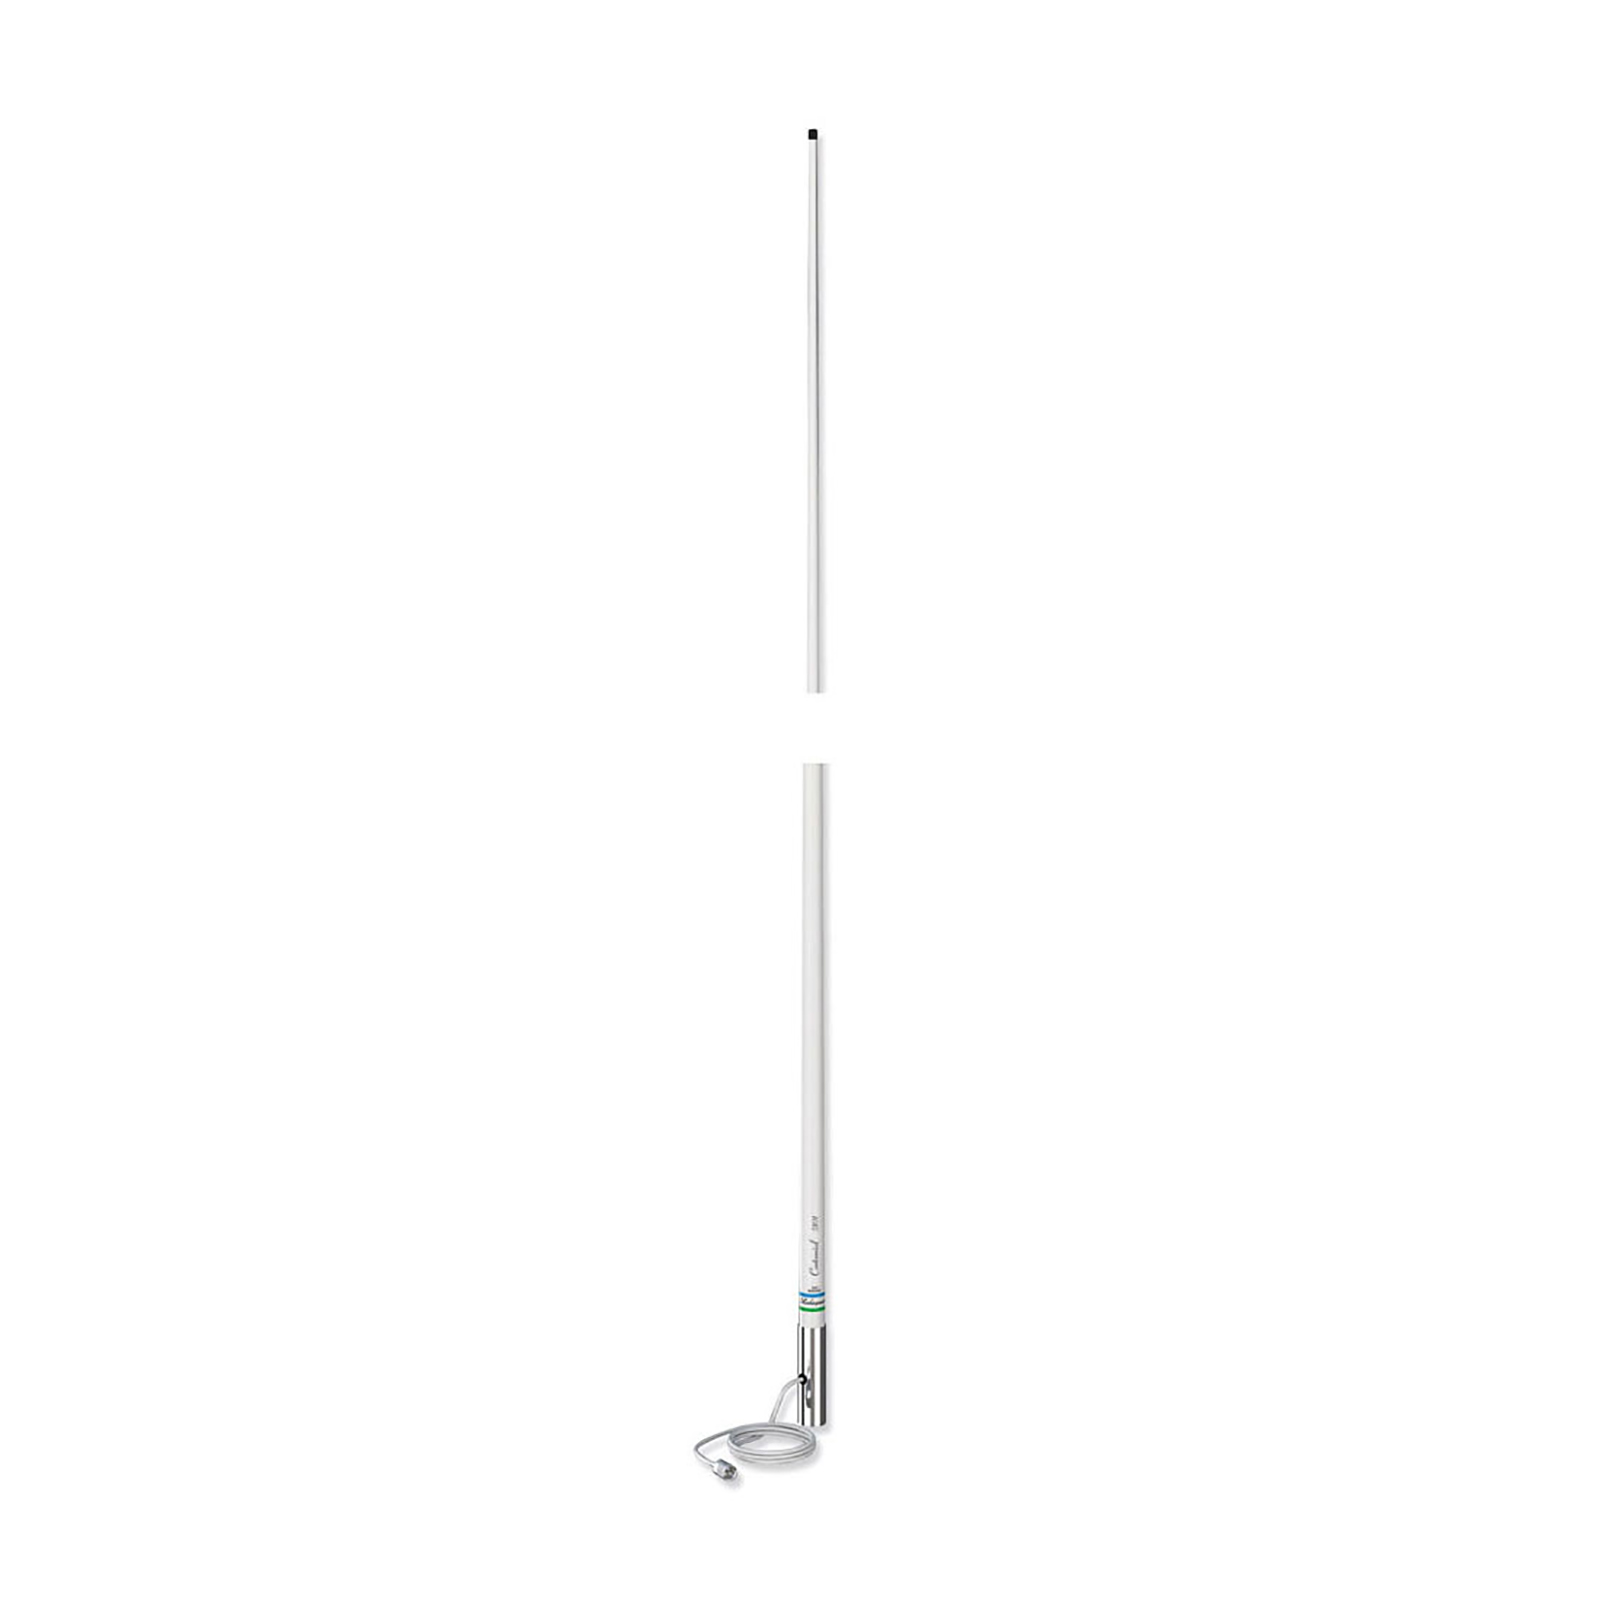 SHAKESPEARE 5101 8' 6dB Classic VHF Marine Antenna with Cable - White